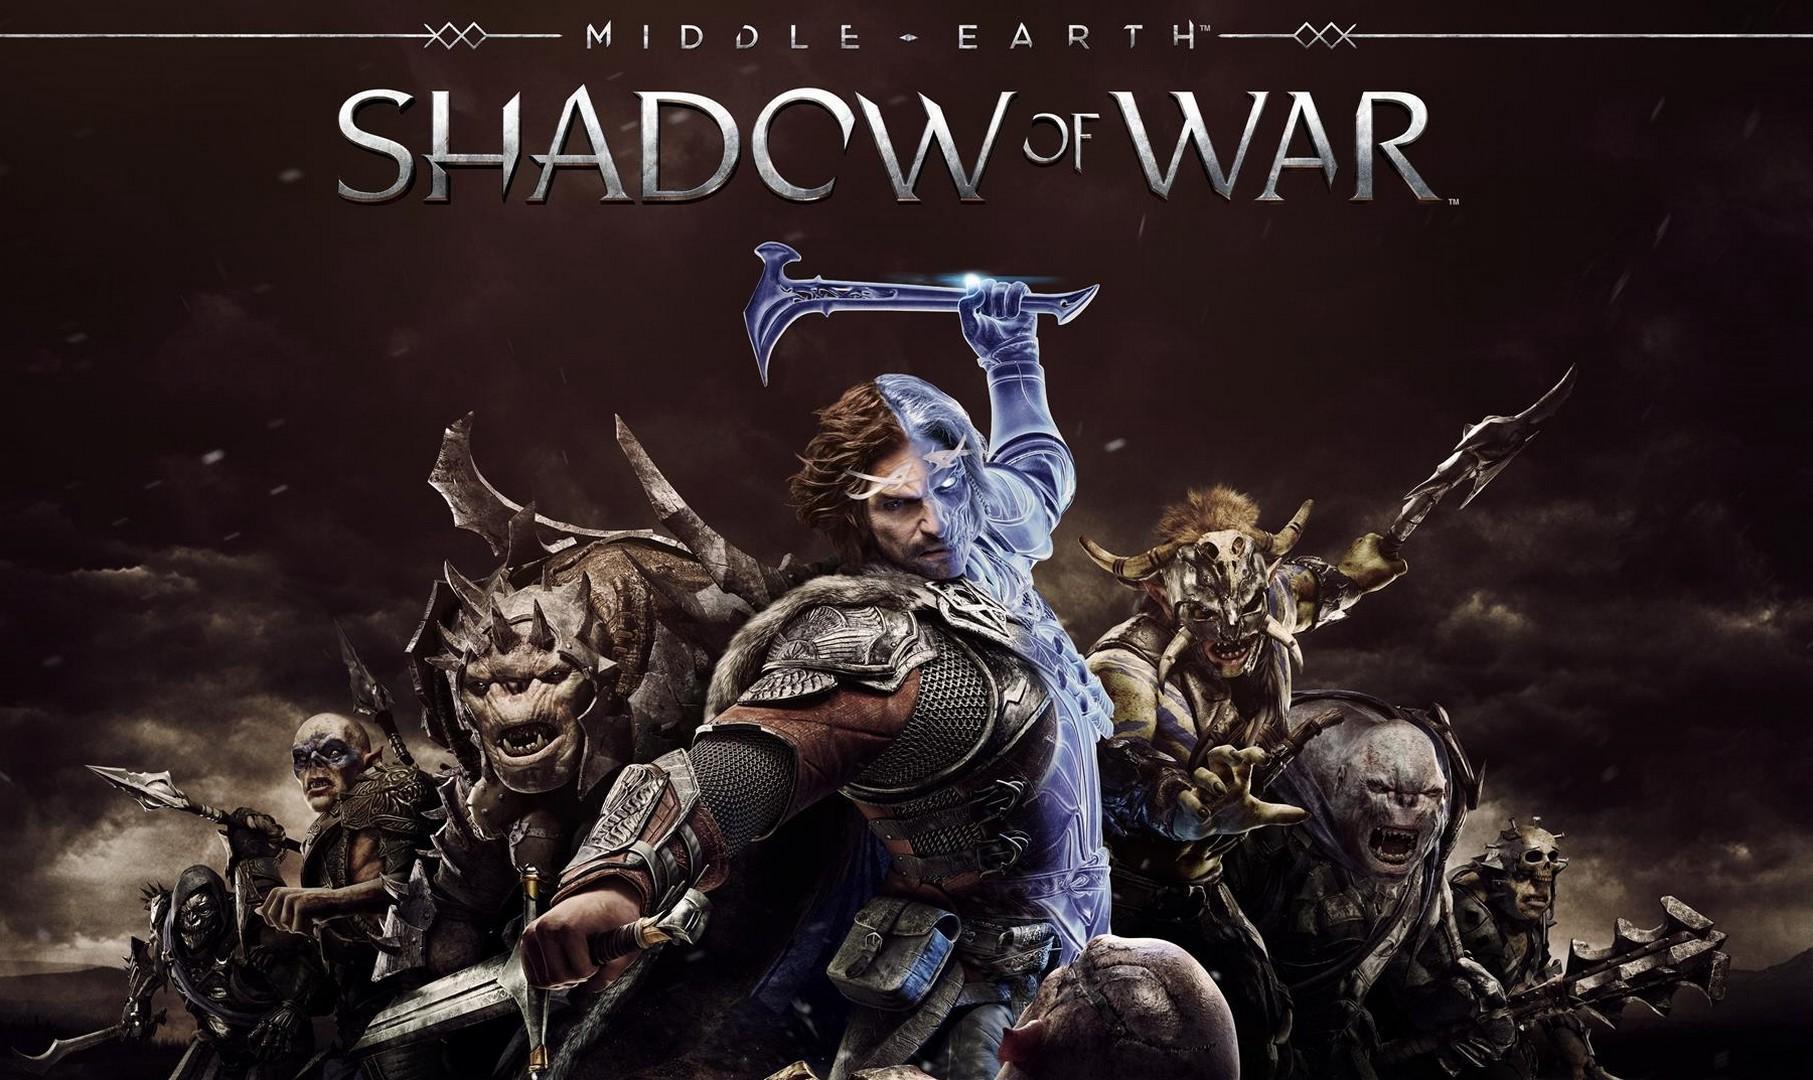 iphone xs shadow of mordor image